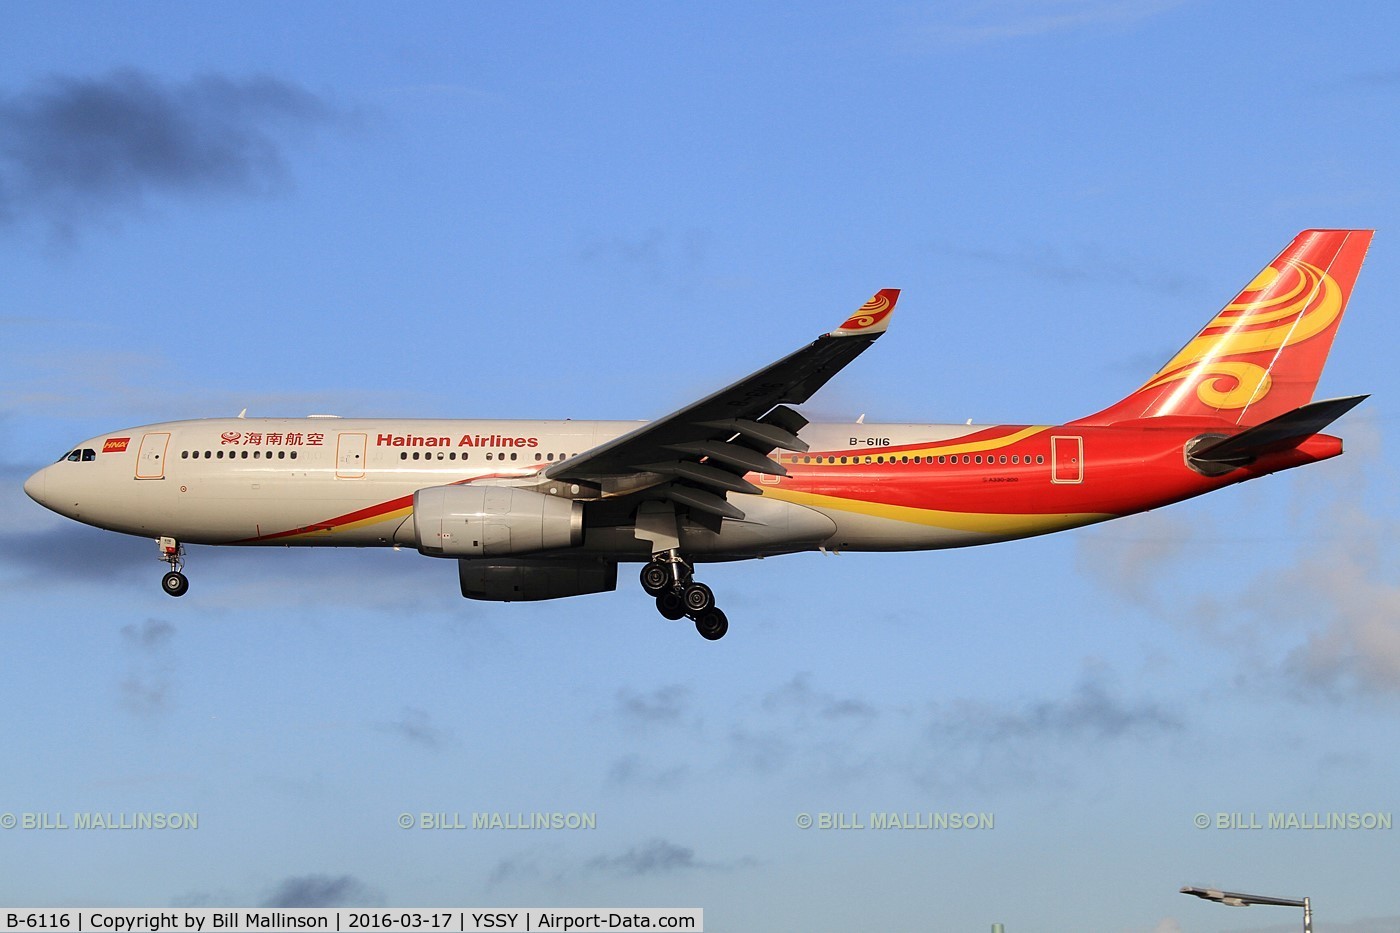 B-6116, 2007 Airbus A330-243 C/N 875, finals to 16R